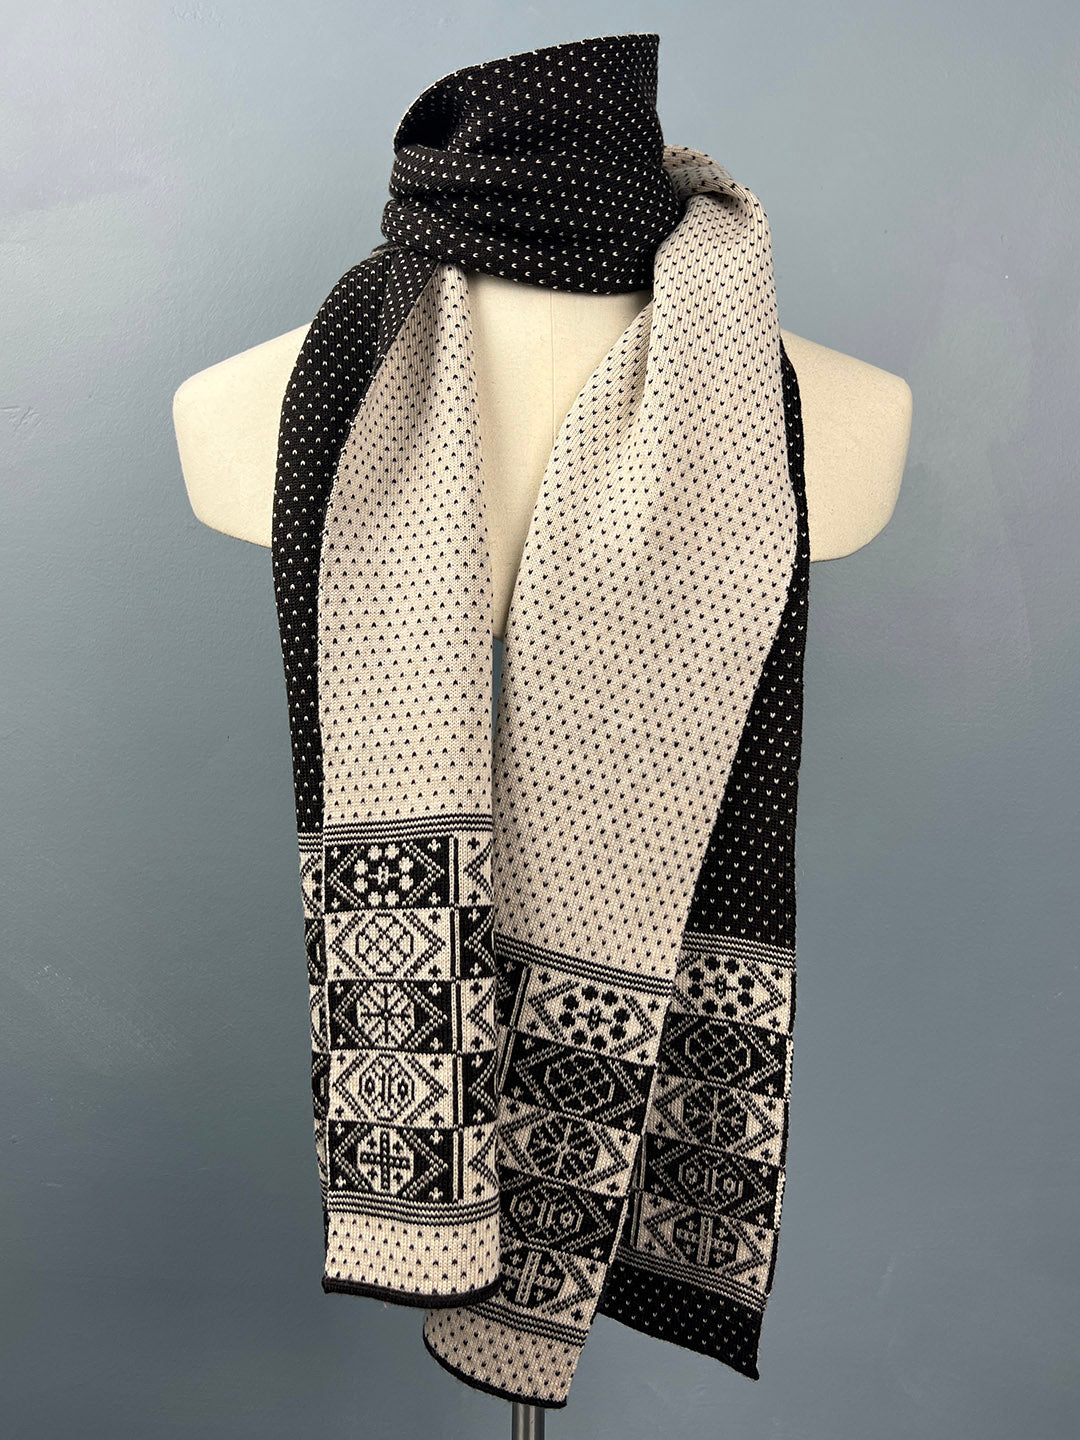 reversible Fair Isle scarf is knitted by BAKKA in superfine merino wool shown on a mannequin bust